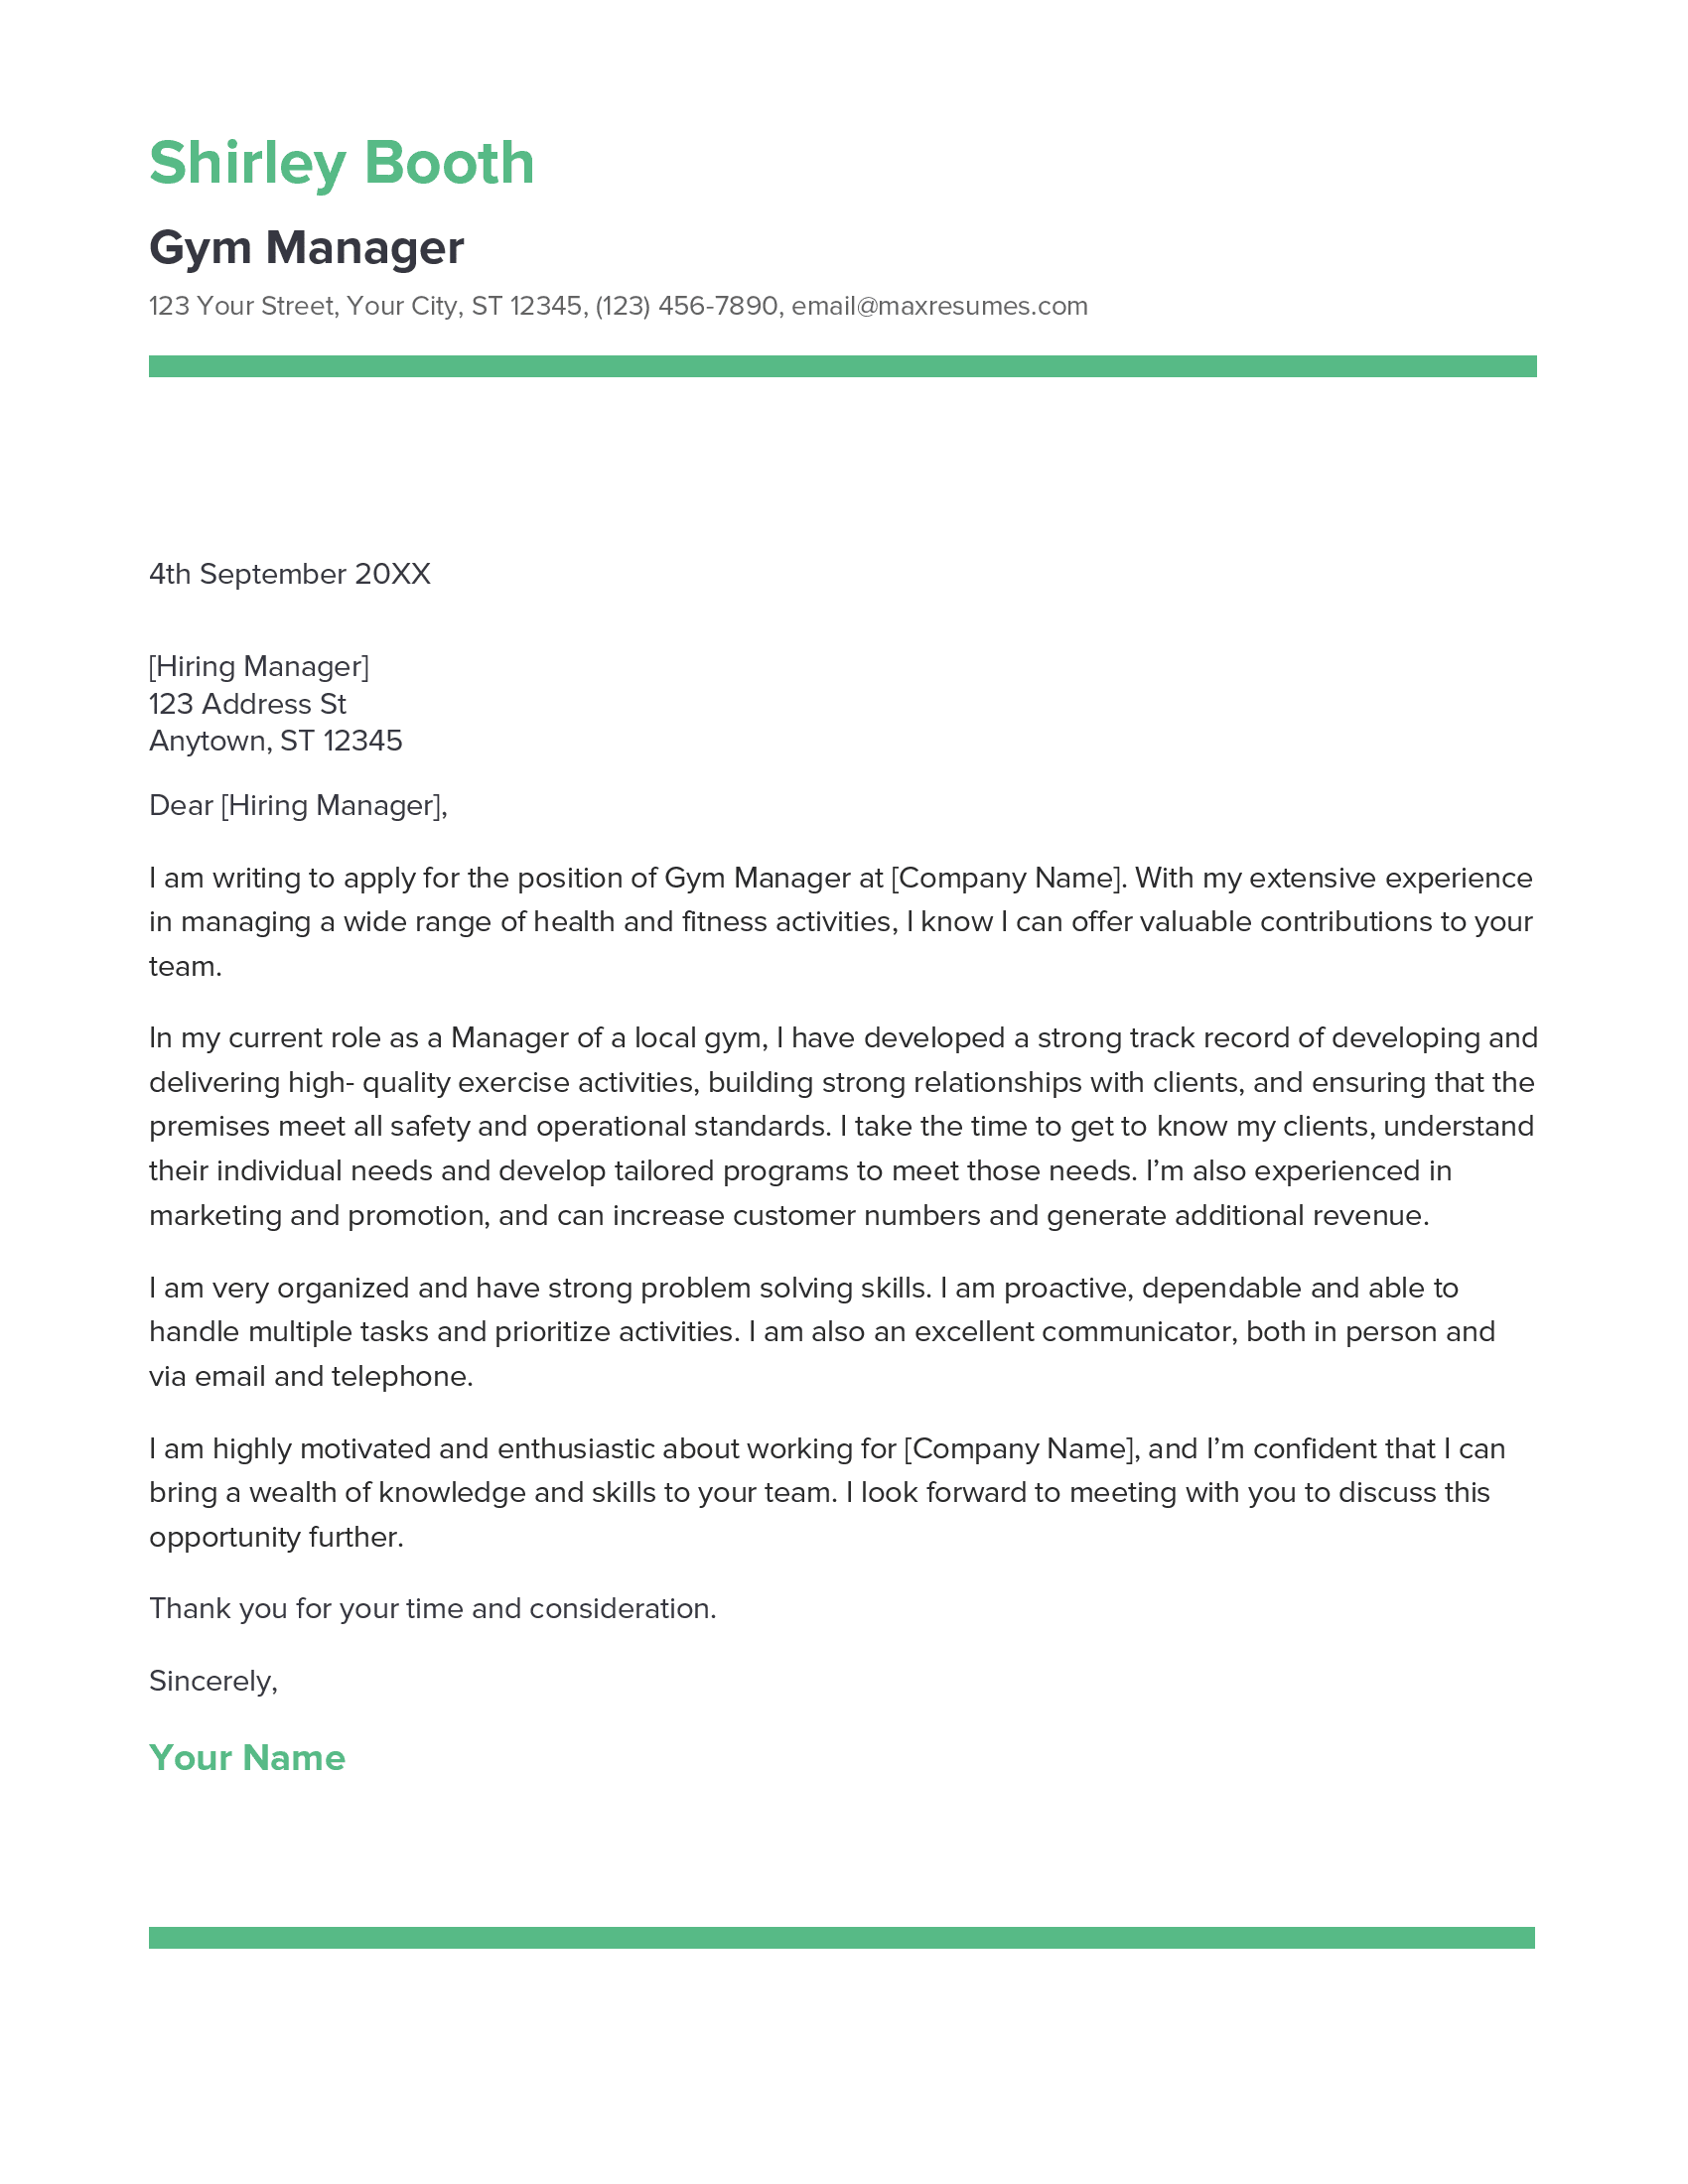 Gym Manager Cover Letter Example